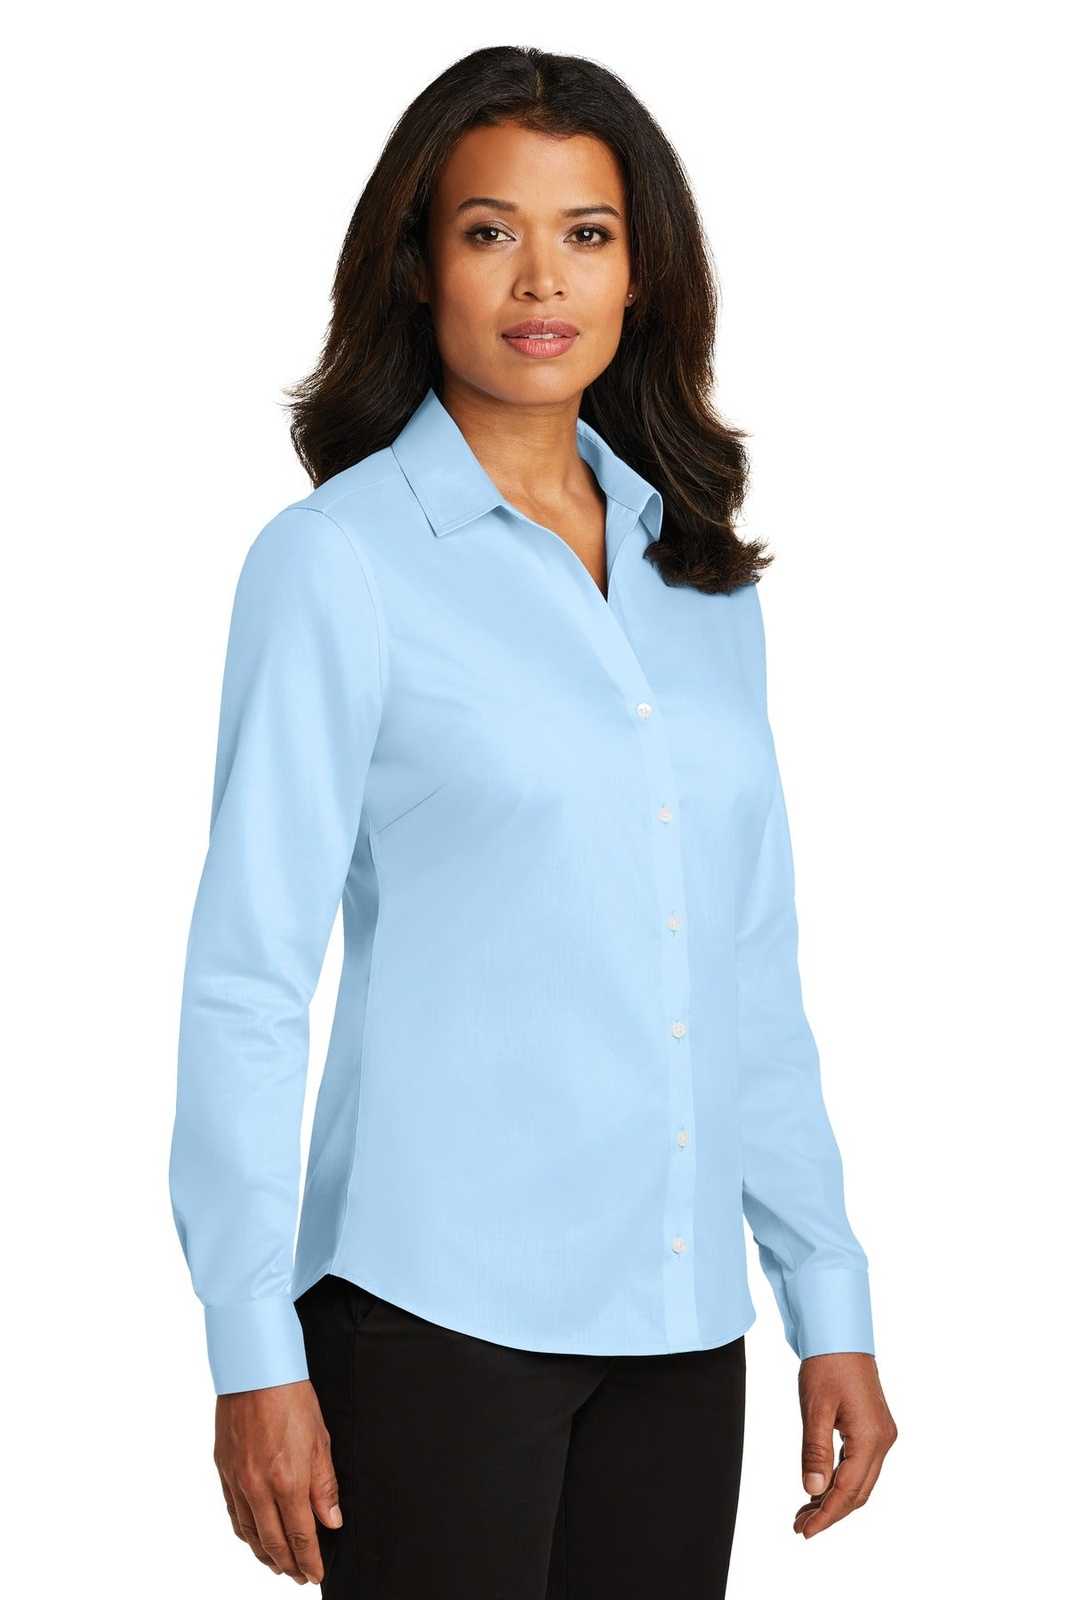 Red House RH79 Ladies Non-Iron Twill Shirt - Heritage Blue - HIT a Double - 4